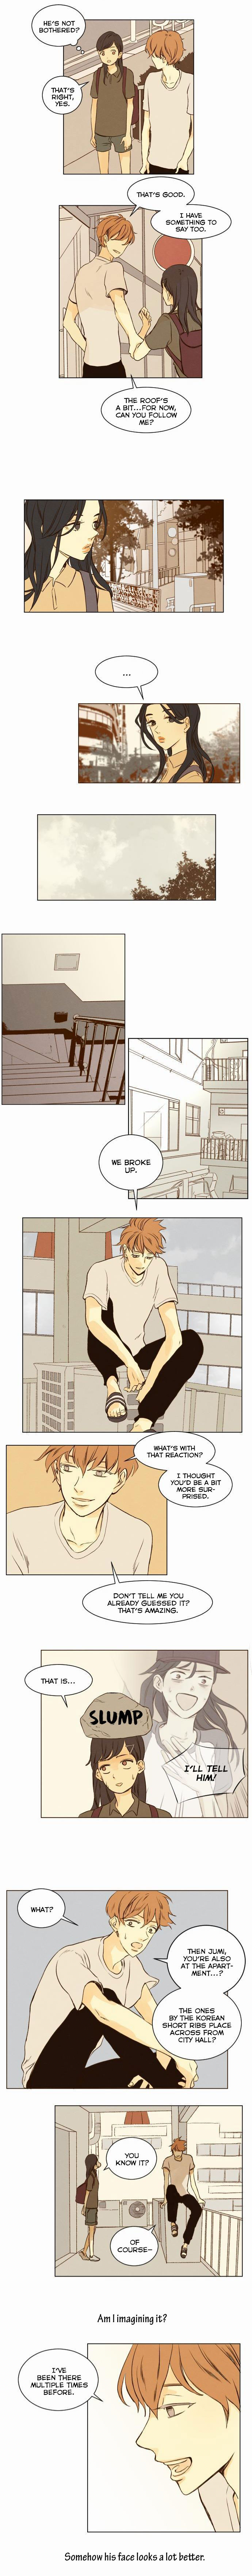 That Summer (KIM Hyun) Chapter 008 page 7